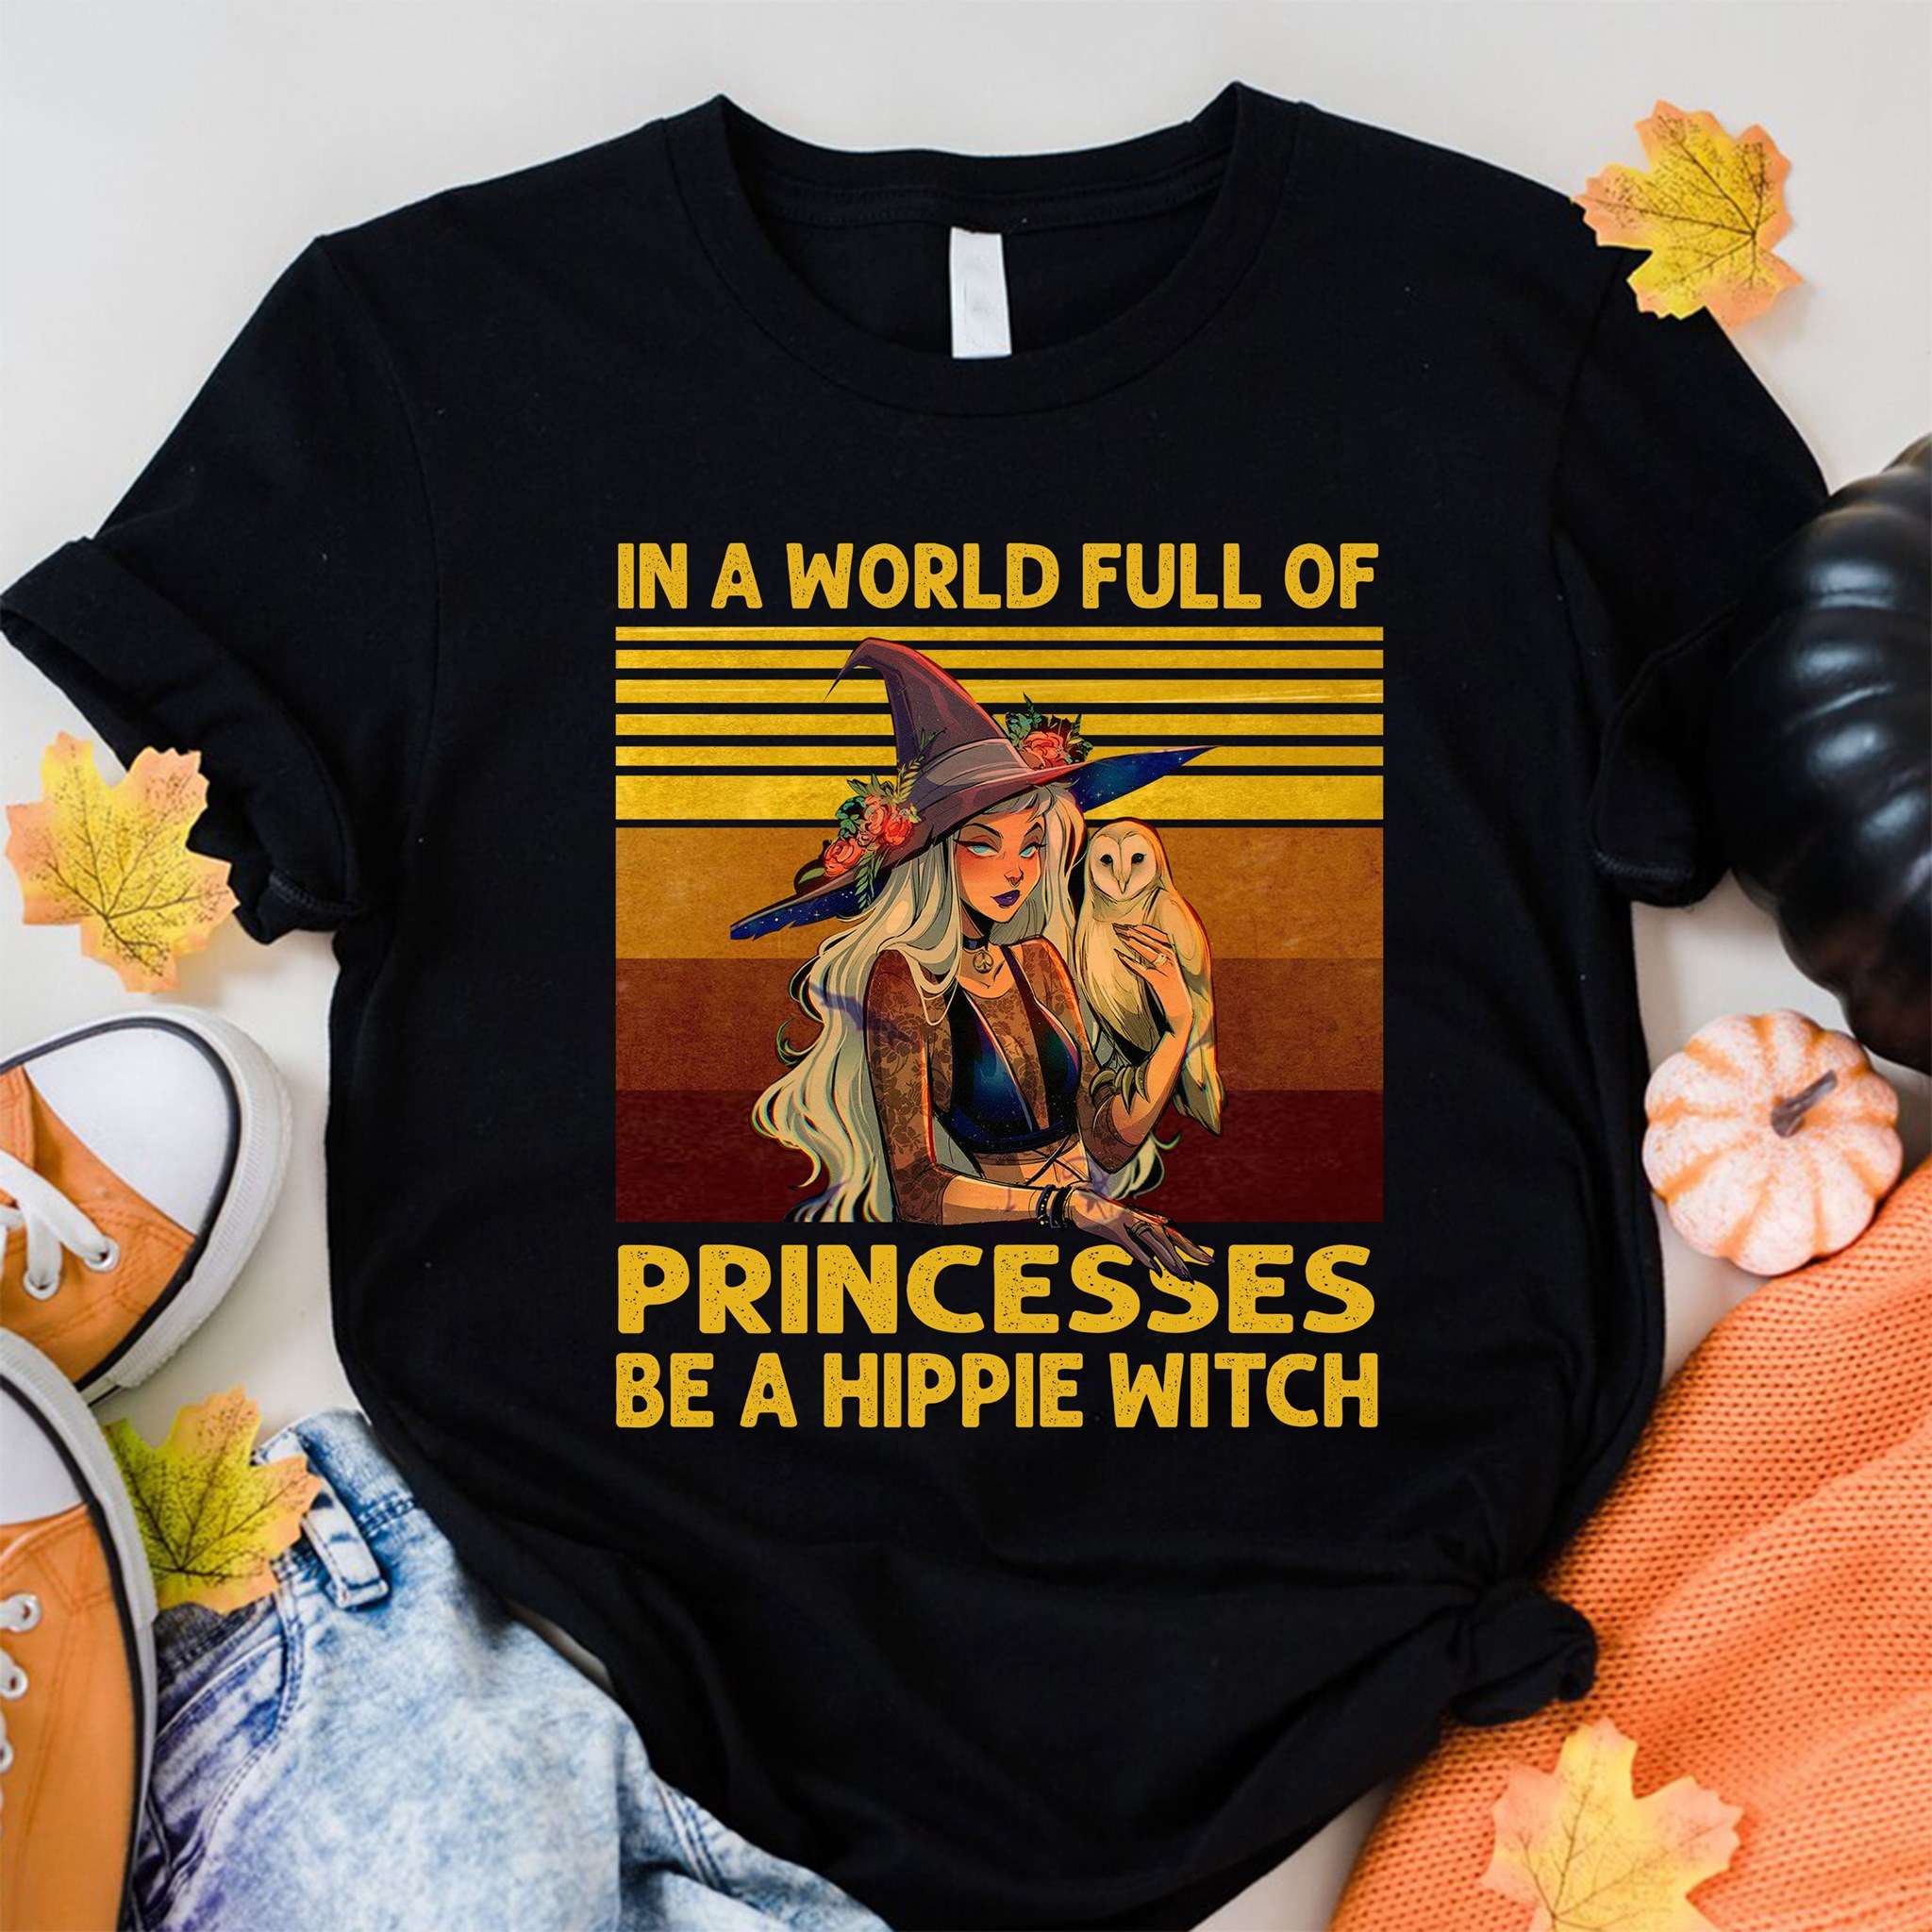 In a world full of princesses be a Hippie Witch - Hippie lifestyle, Halloween witch costume